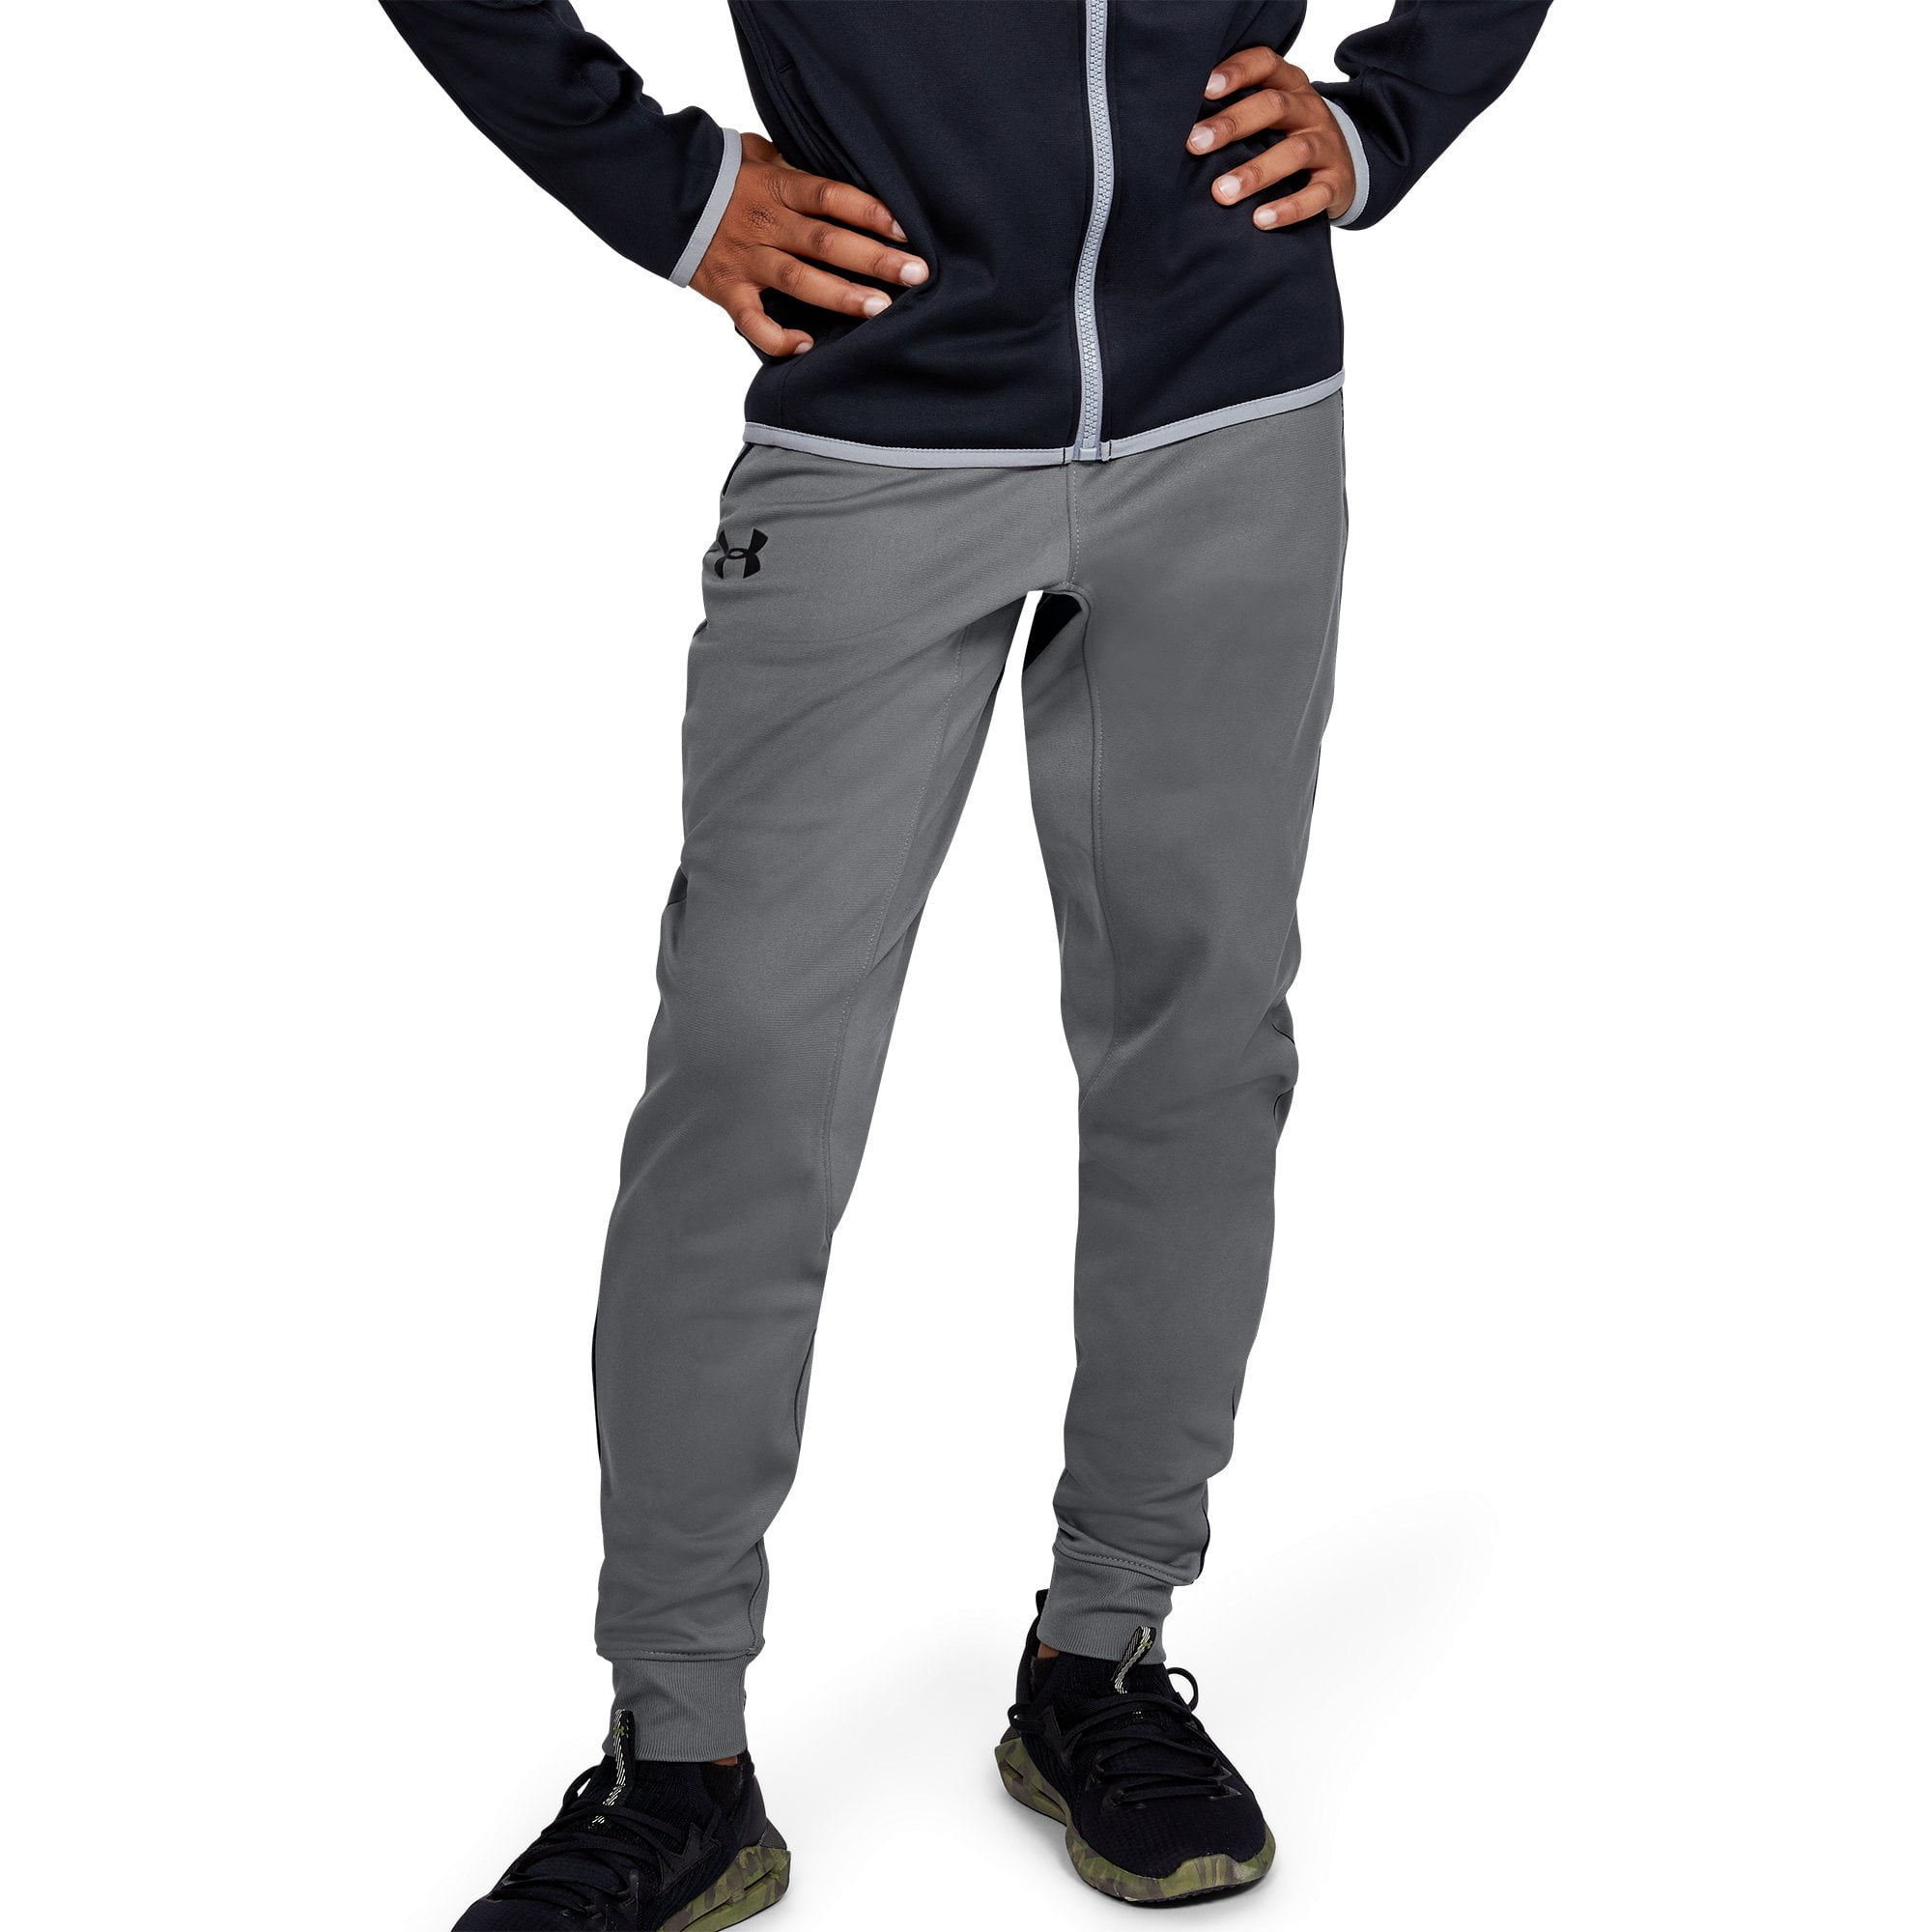 Under Armour Pennant Tapered Boys Pants 